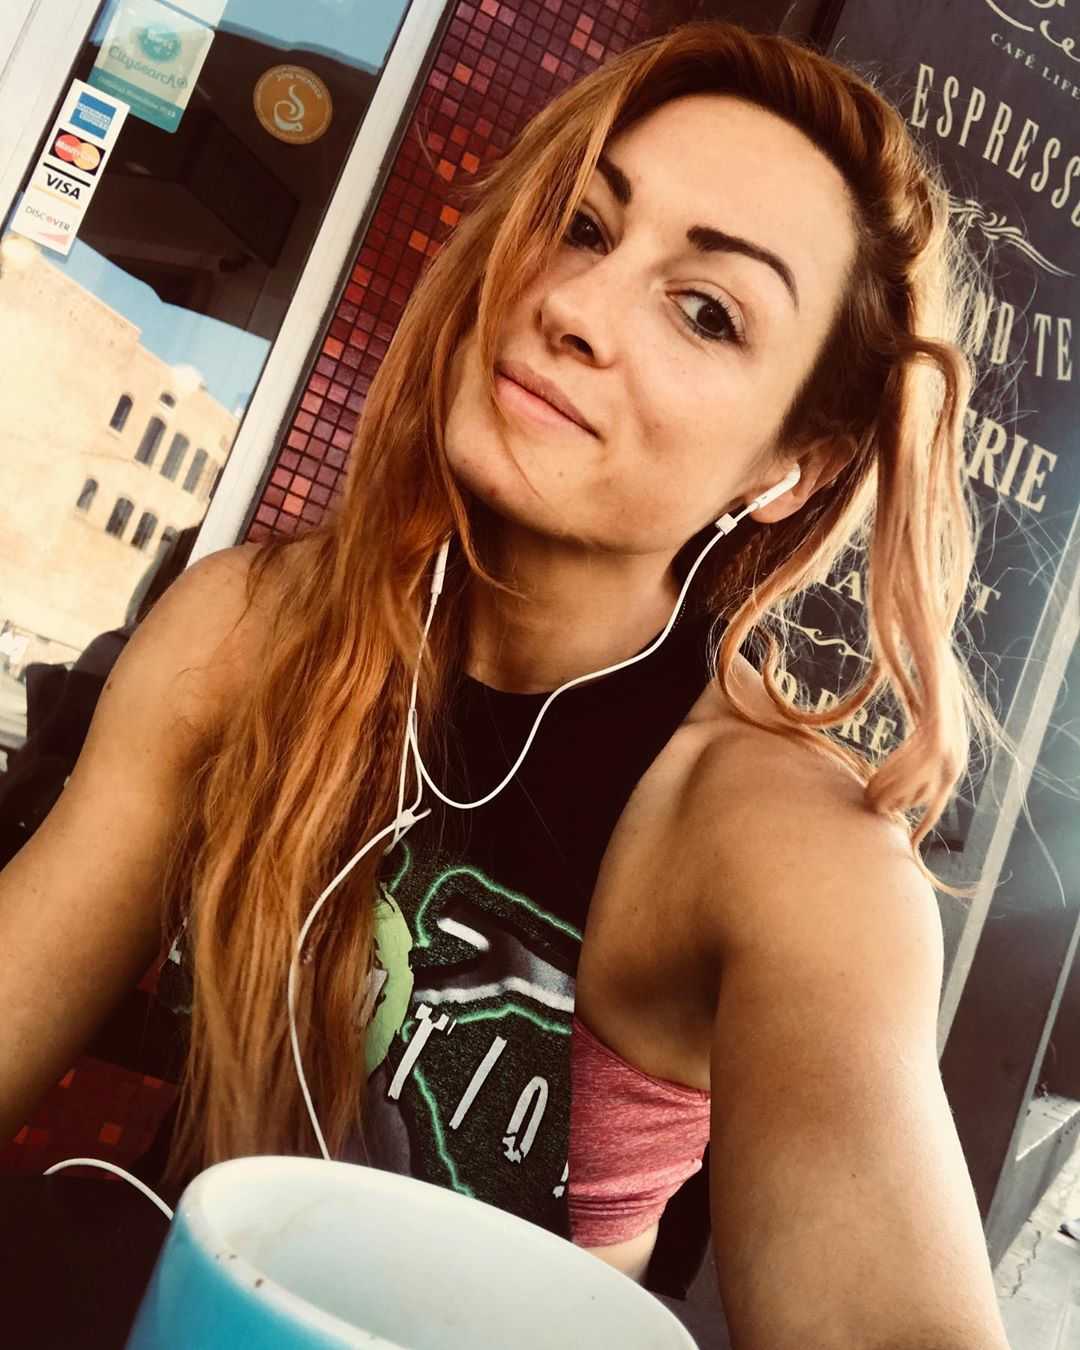 70+ Hot And Sexy Pictures of Becky Lynch – WWE Diva Will Sizzle You Up 109